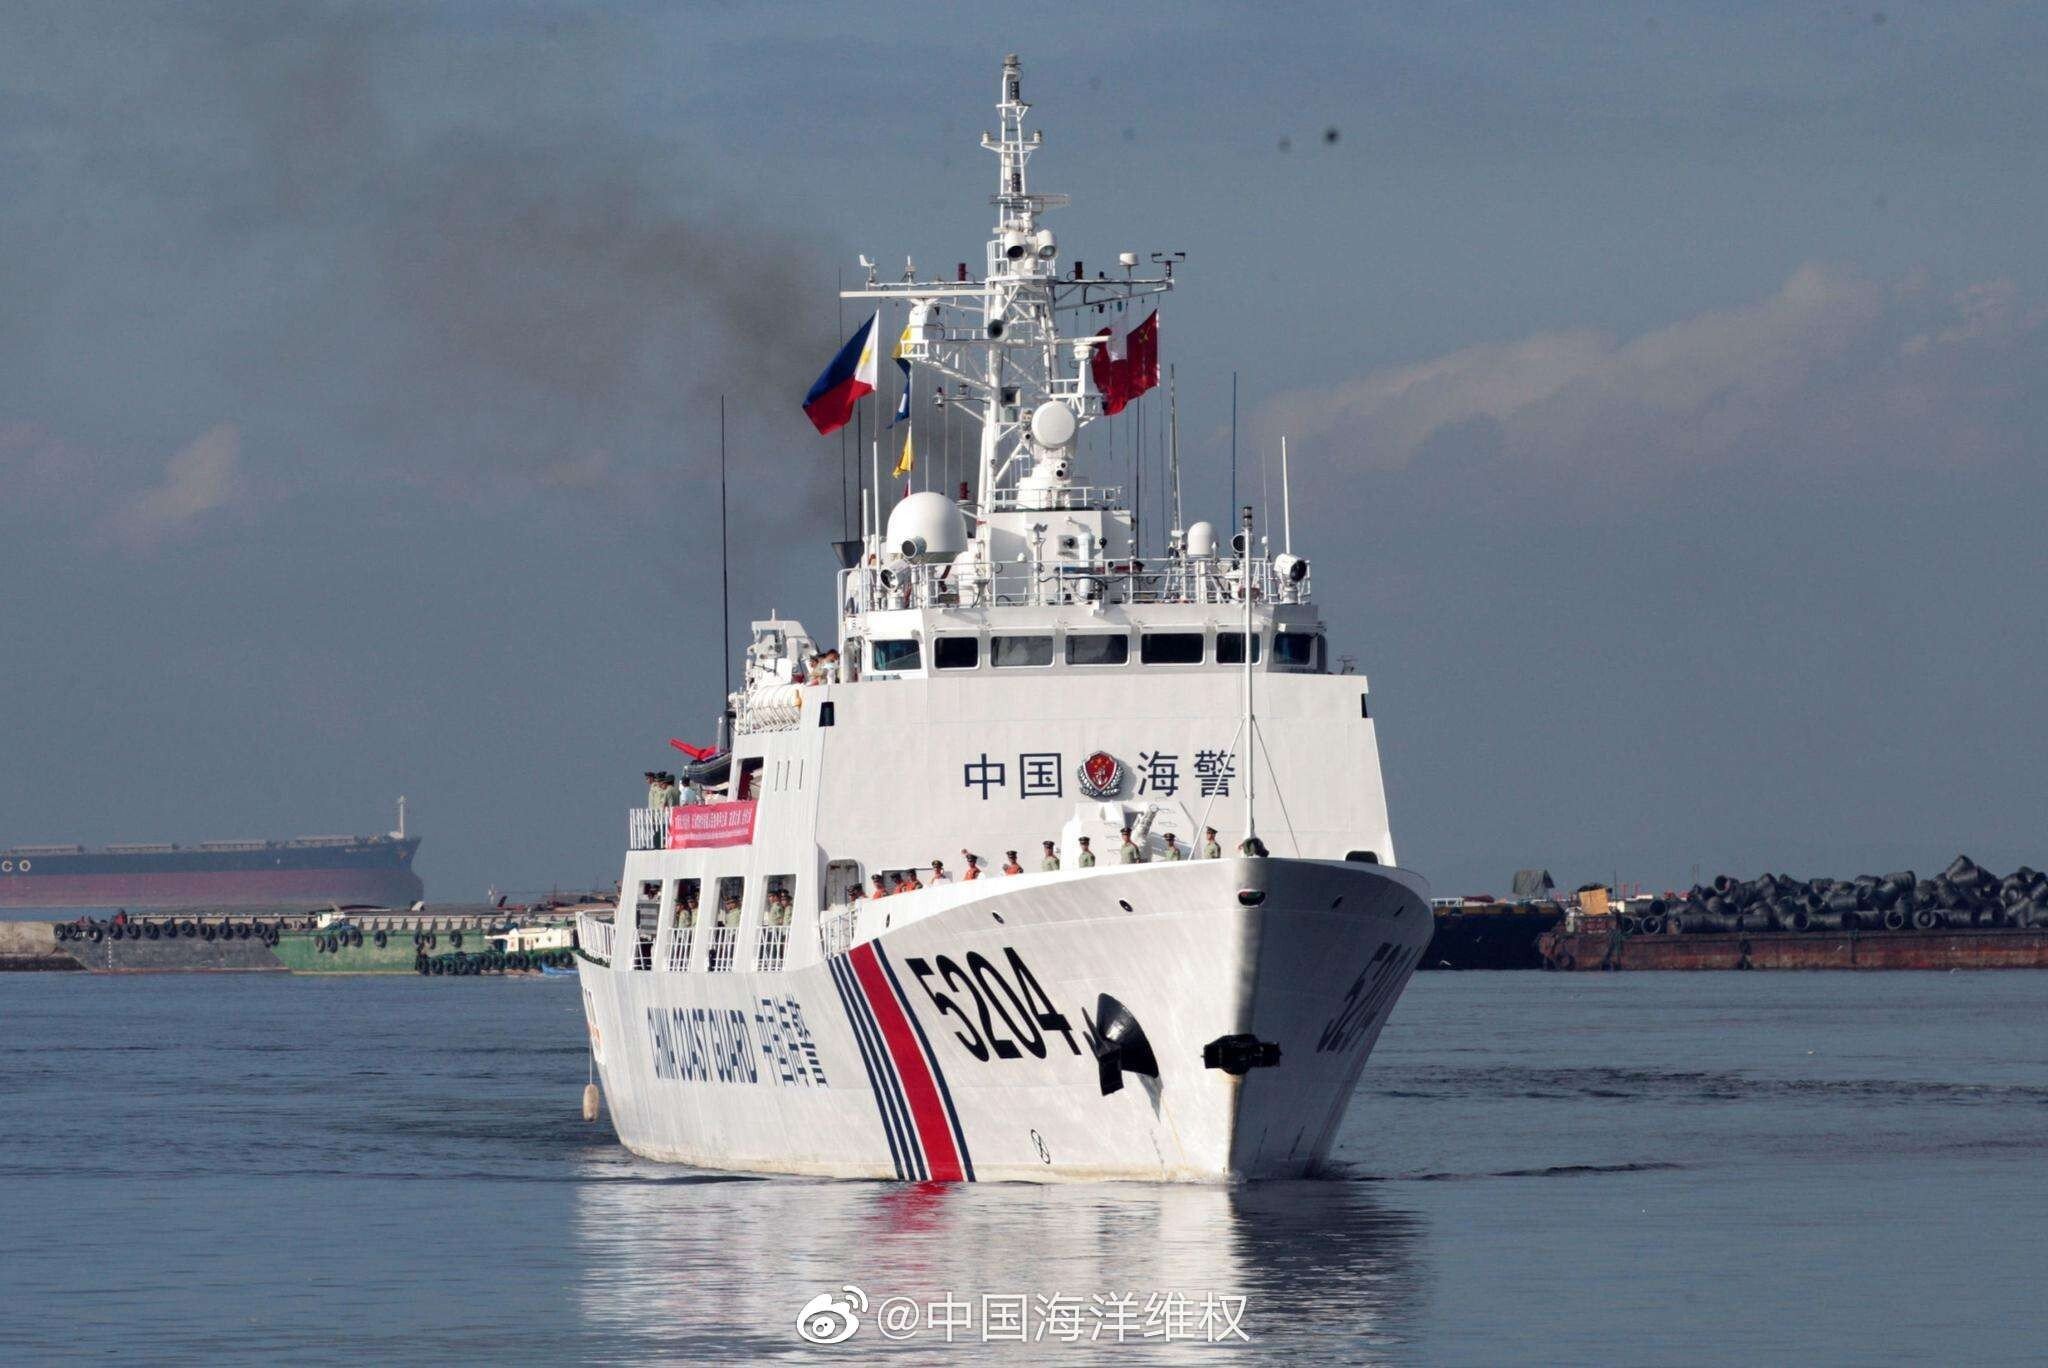 The reporting system for foreign vessels entering and leaving China’s territorial water was added to the Maritime Traffic Safety Law which was revised in April. From Wednesday foreign ships must report ship ID and cargo information to China’s maritime administrations. Photo: Weibo